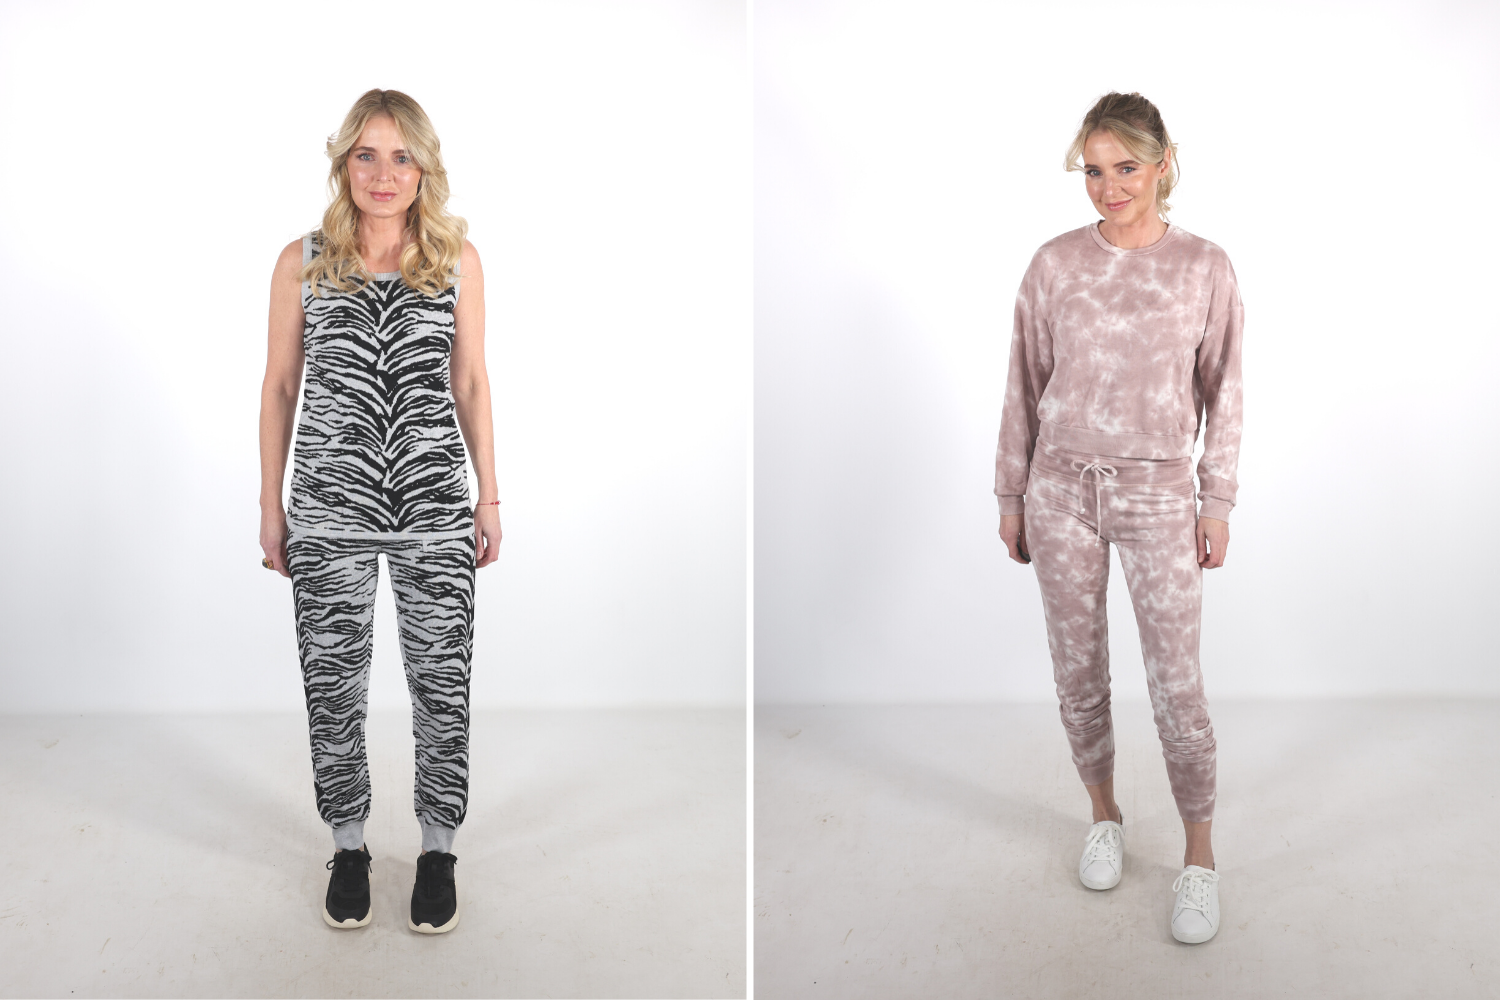 How To Look Younger, Erin Busbee of Busbee warning to beware of matching sets that are frumpy including a tiger print matching set on the left and a pink tie dye matching set by Alo Yoga on the right